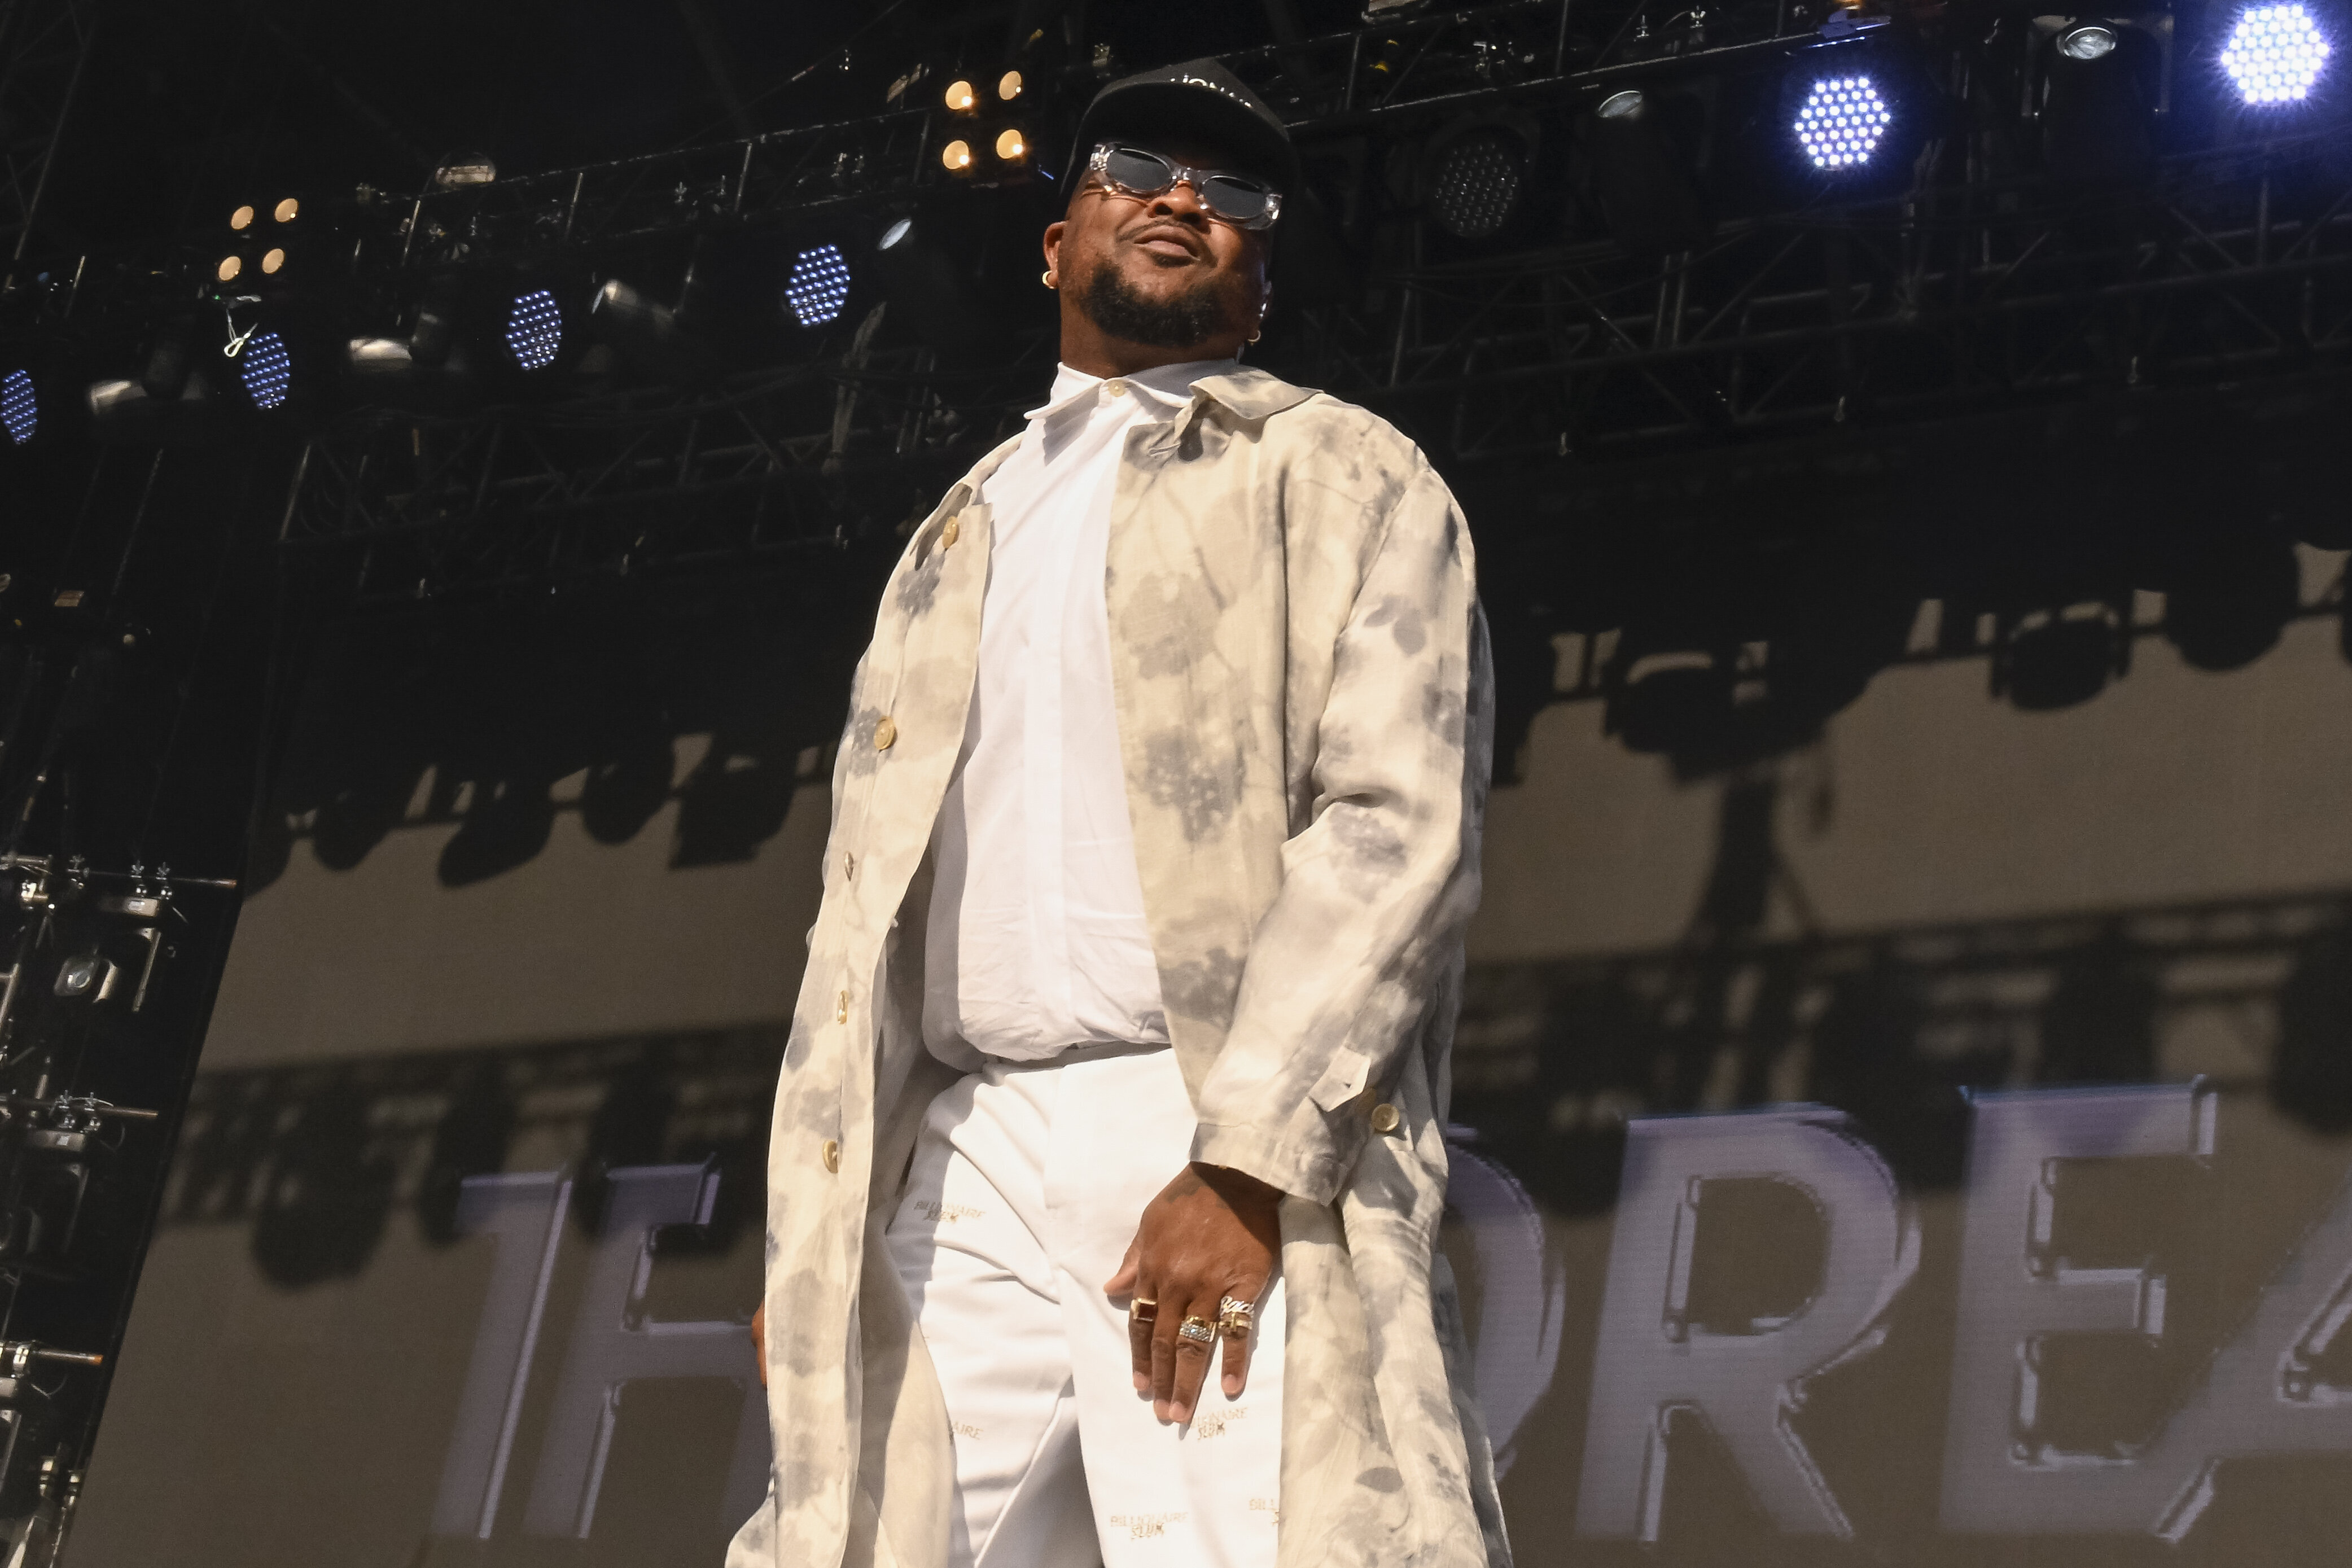  The-Dream performs at 2024 Roots Picnic at Fairmount Park on June 1 in Philadelphia.